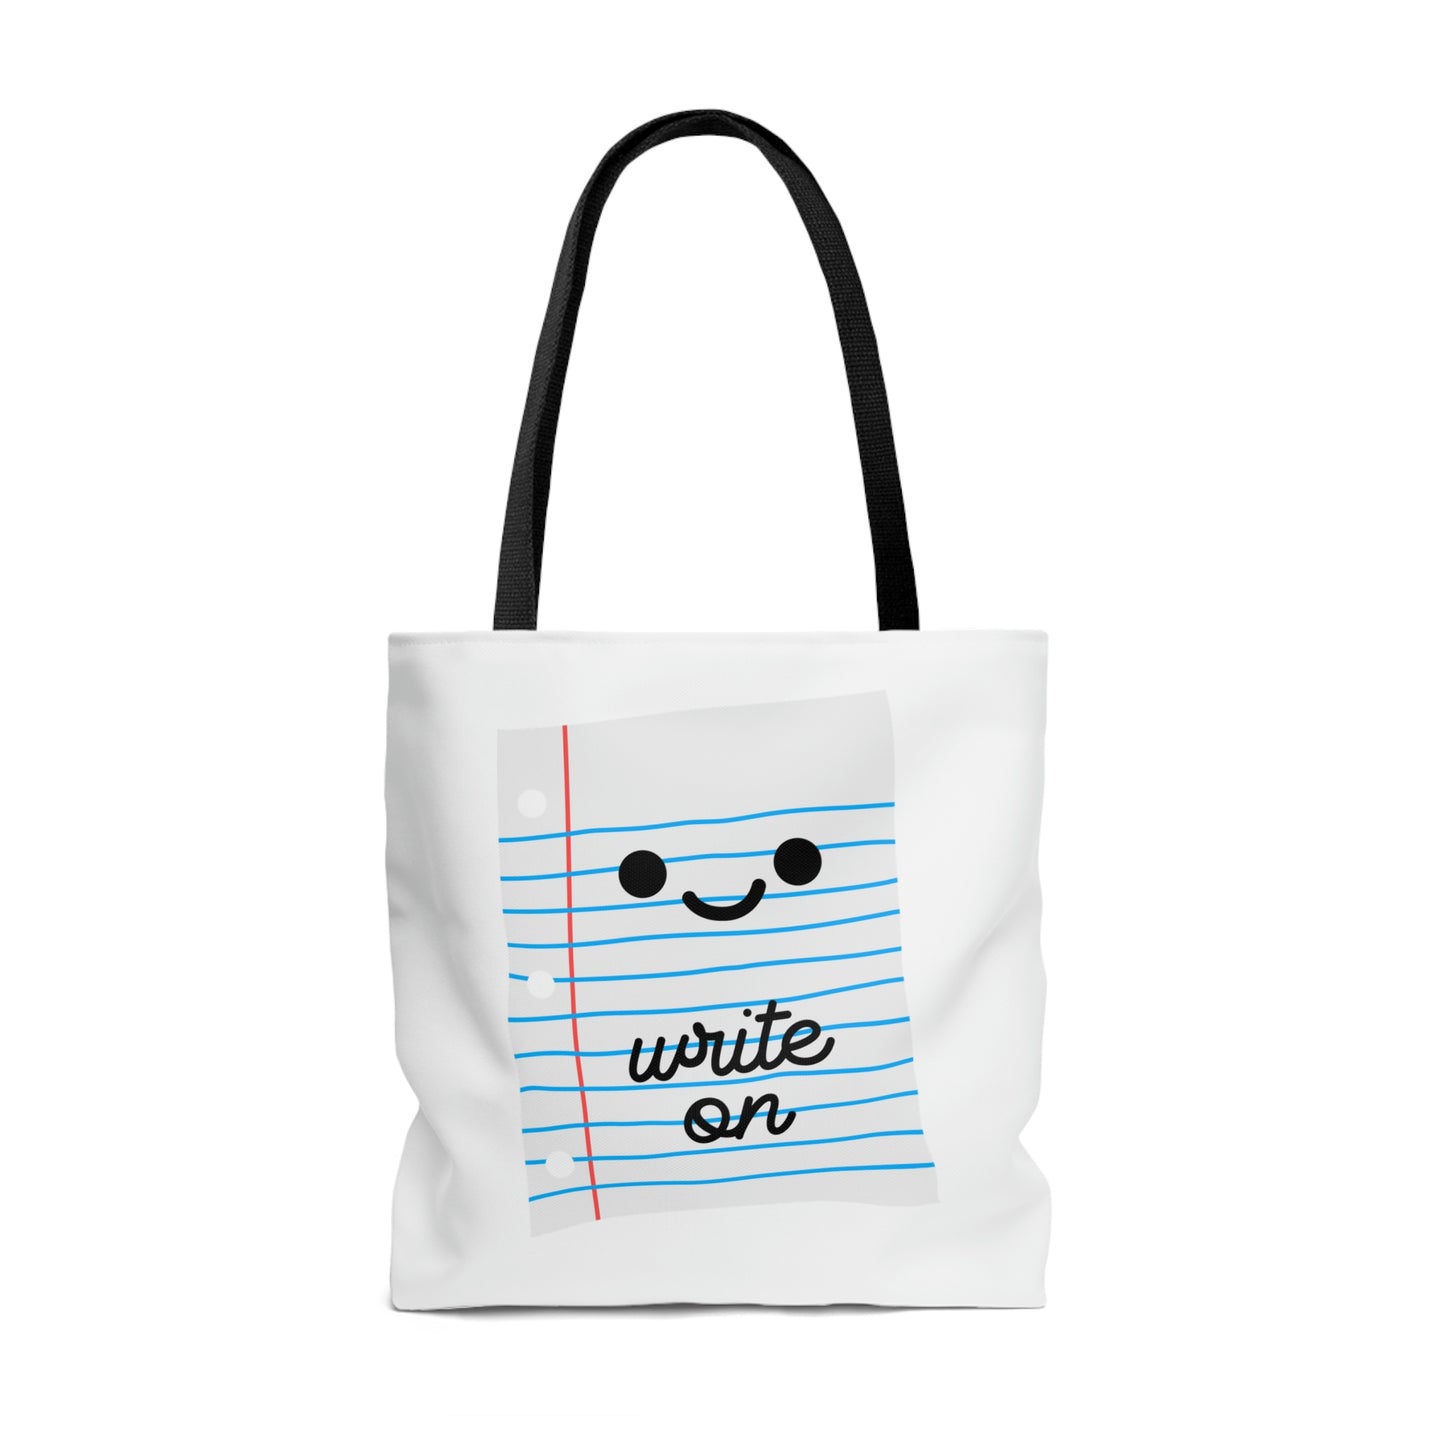 "It's a great day to write an essay"& "Write on" in color Tote Bag